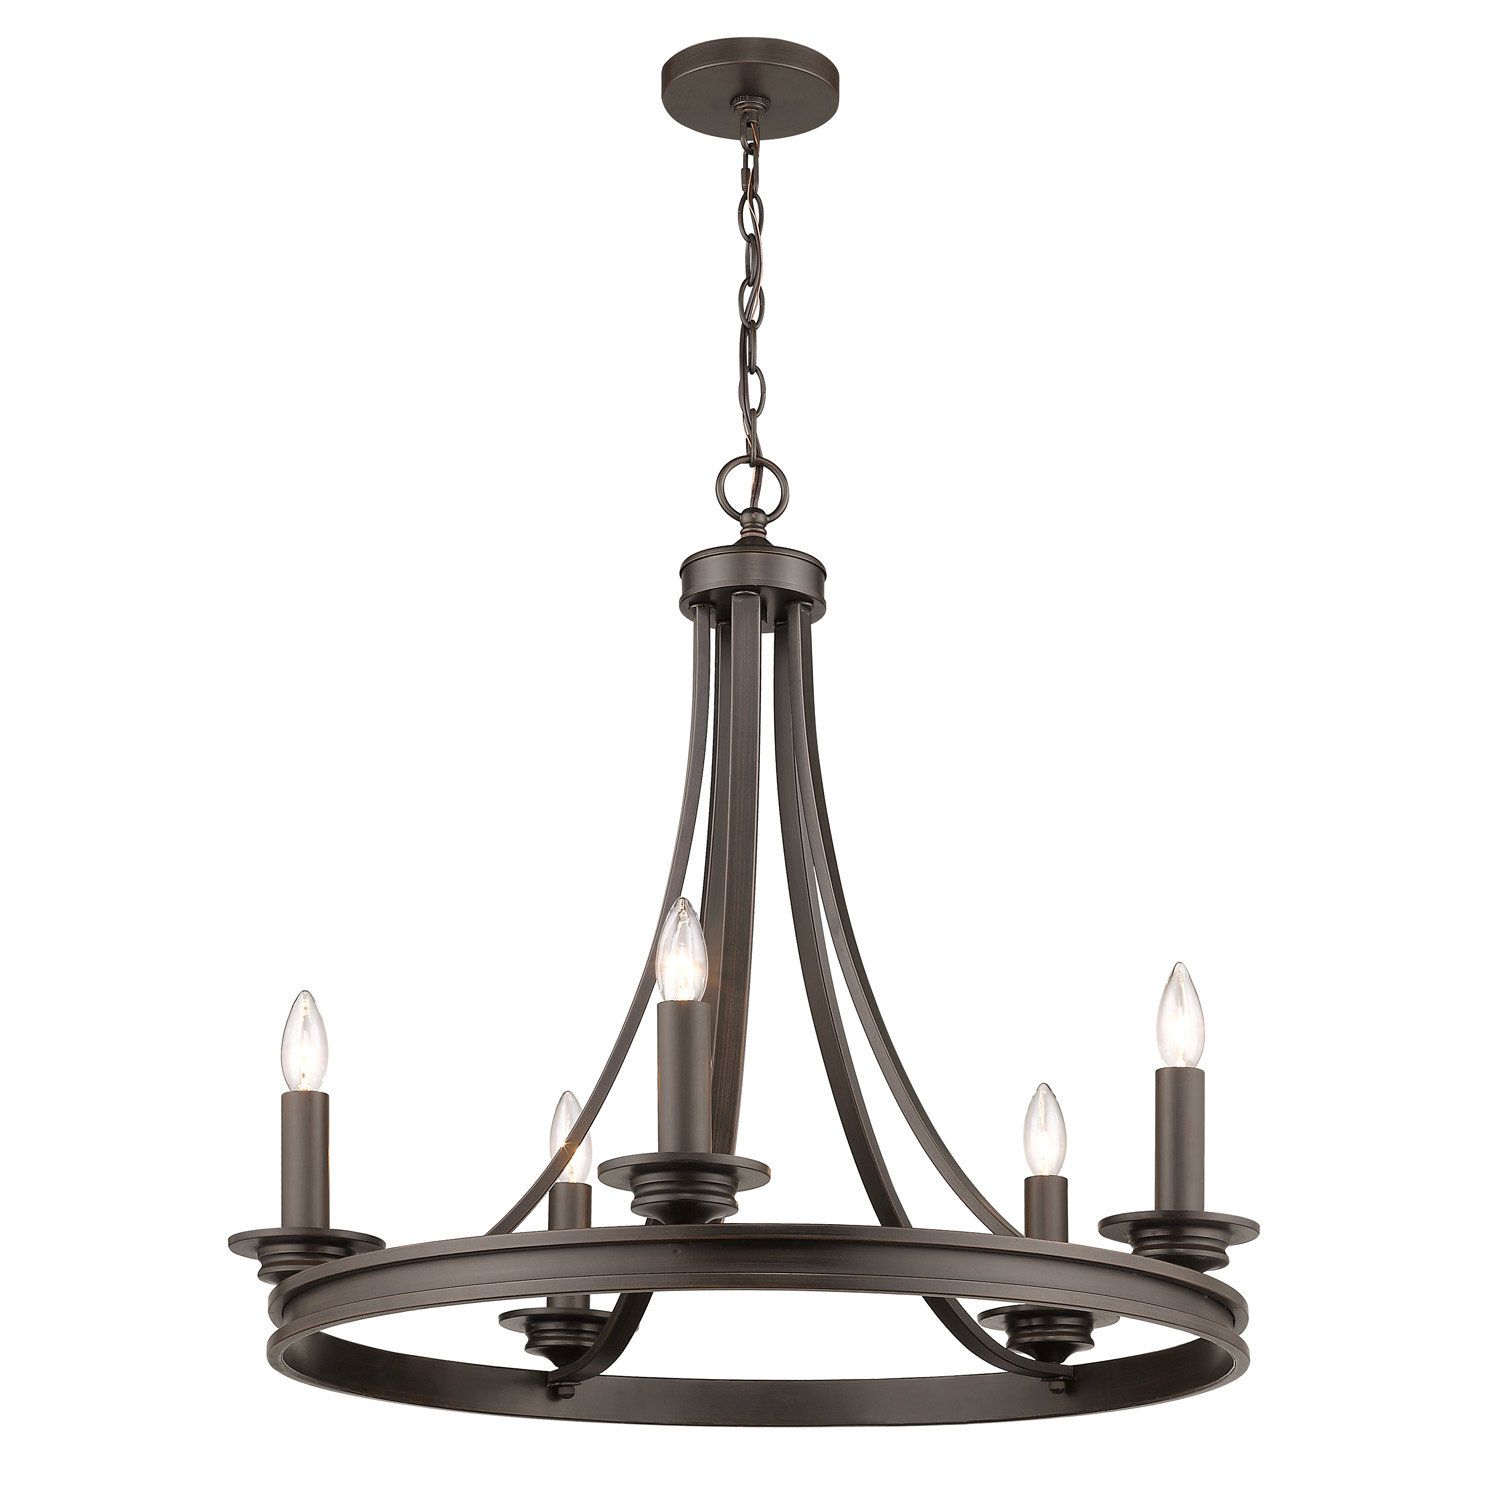 Pavon 5 Light Wagon Wheel Chandelier Intended For Duron 5 Light Empire Chandeliers (View 25 of 30)